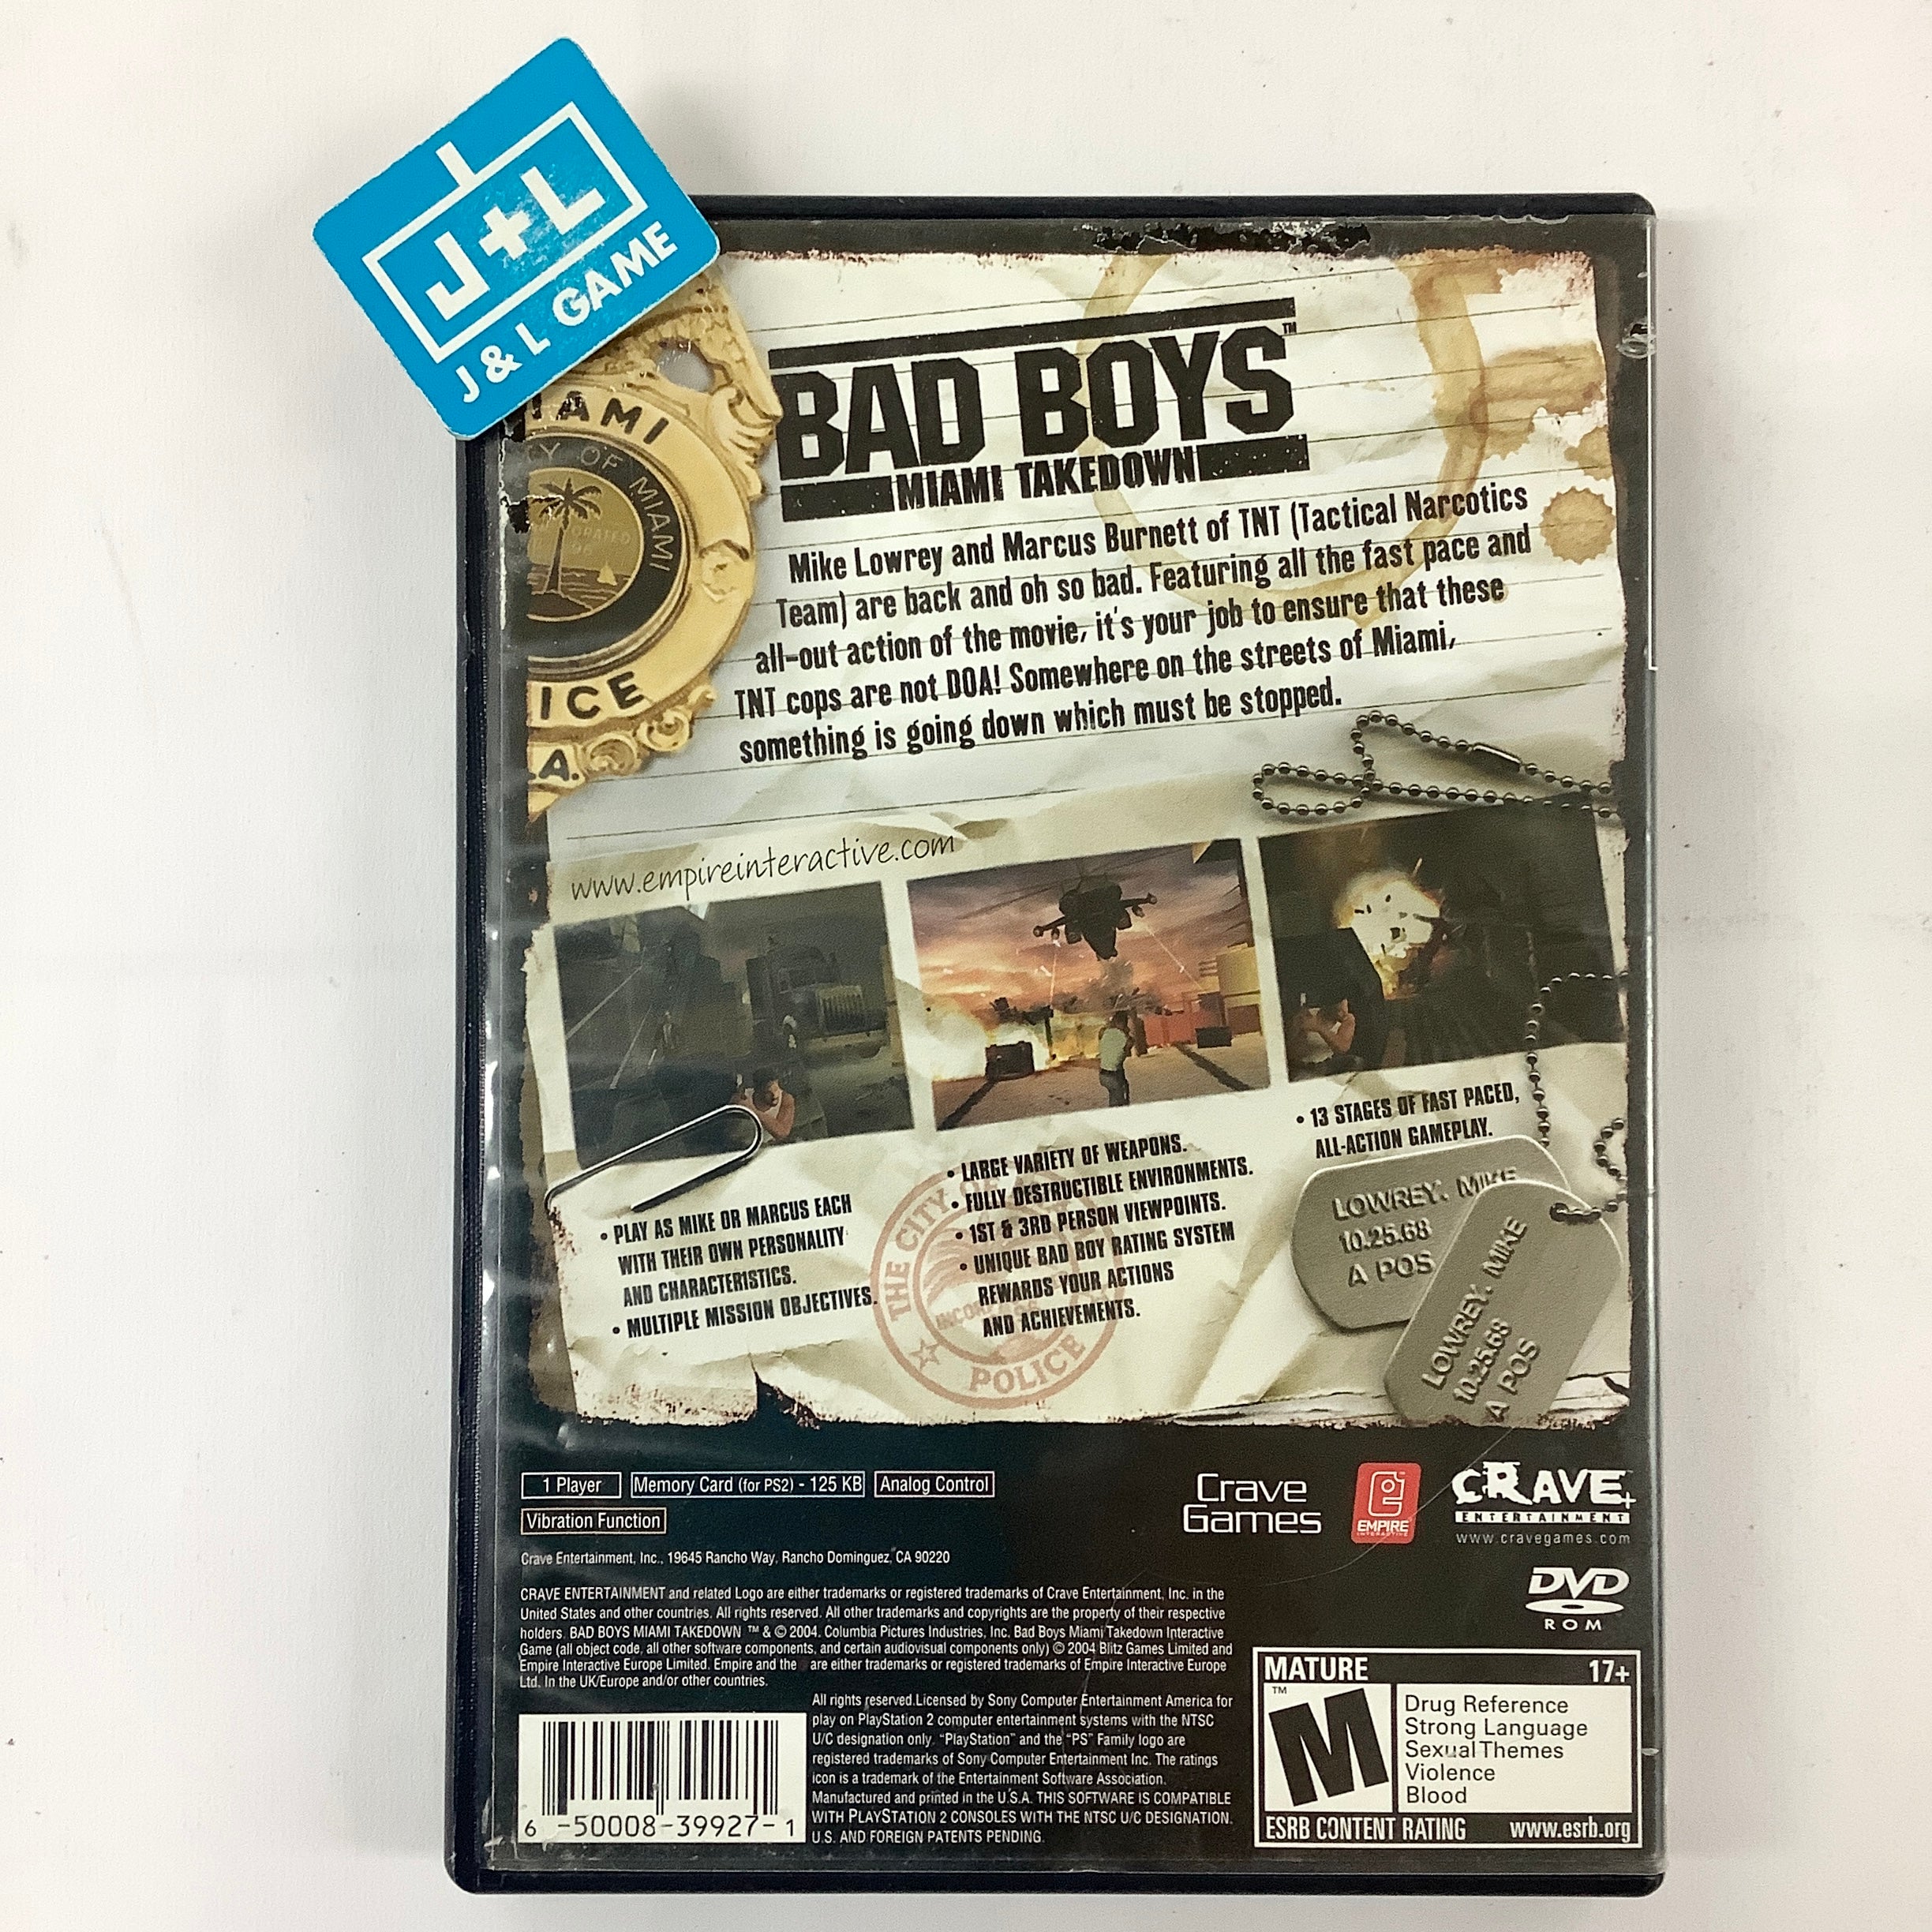 Bad Boys: Miami Takedown - (PS2) PlayStation 2 [Pre-Owned] Video Games Crave Entertainment   